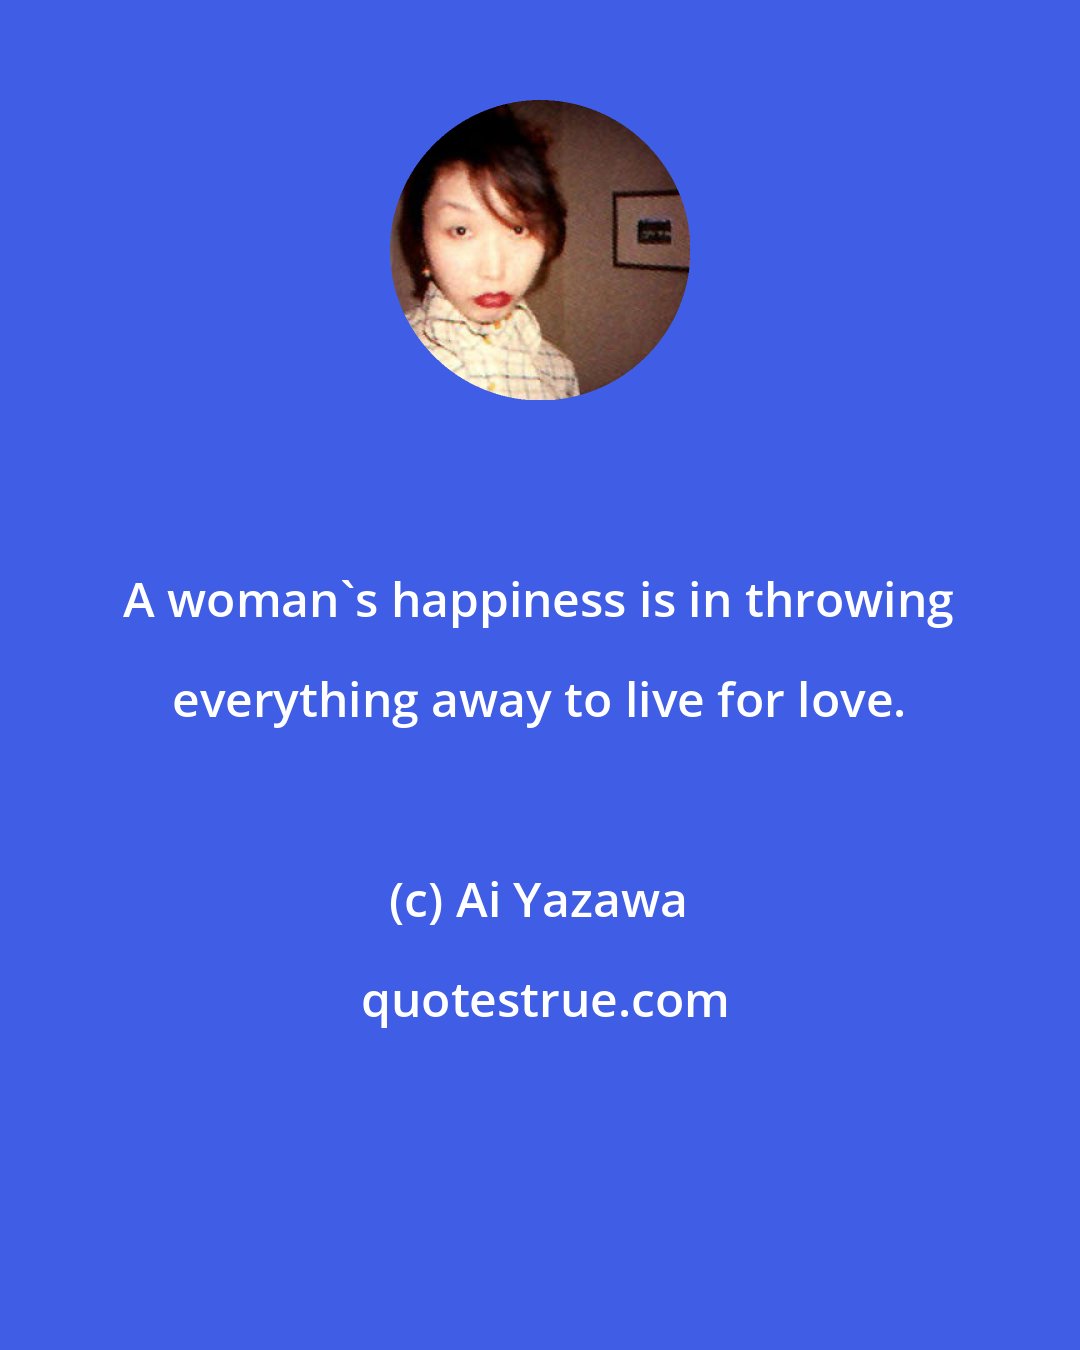 Ai Yazawa: A woman's happiness is in throwing everything away to live for love.